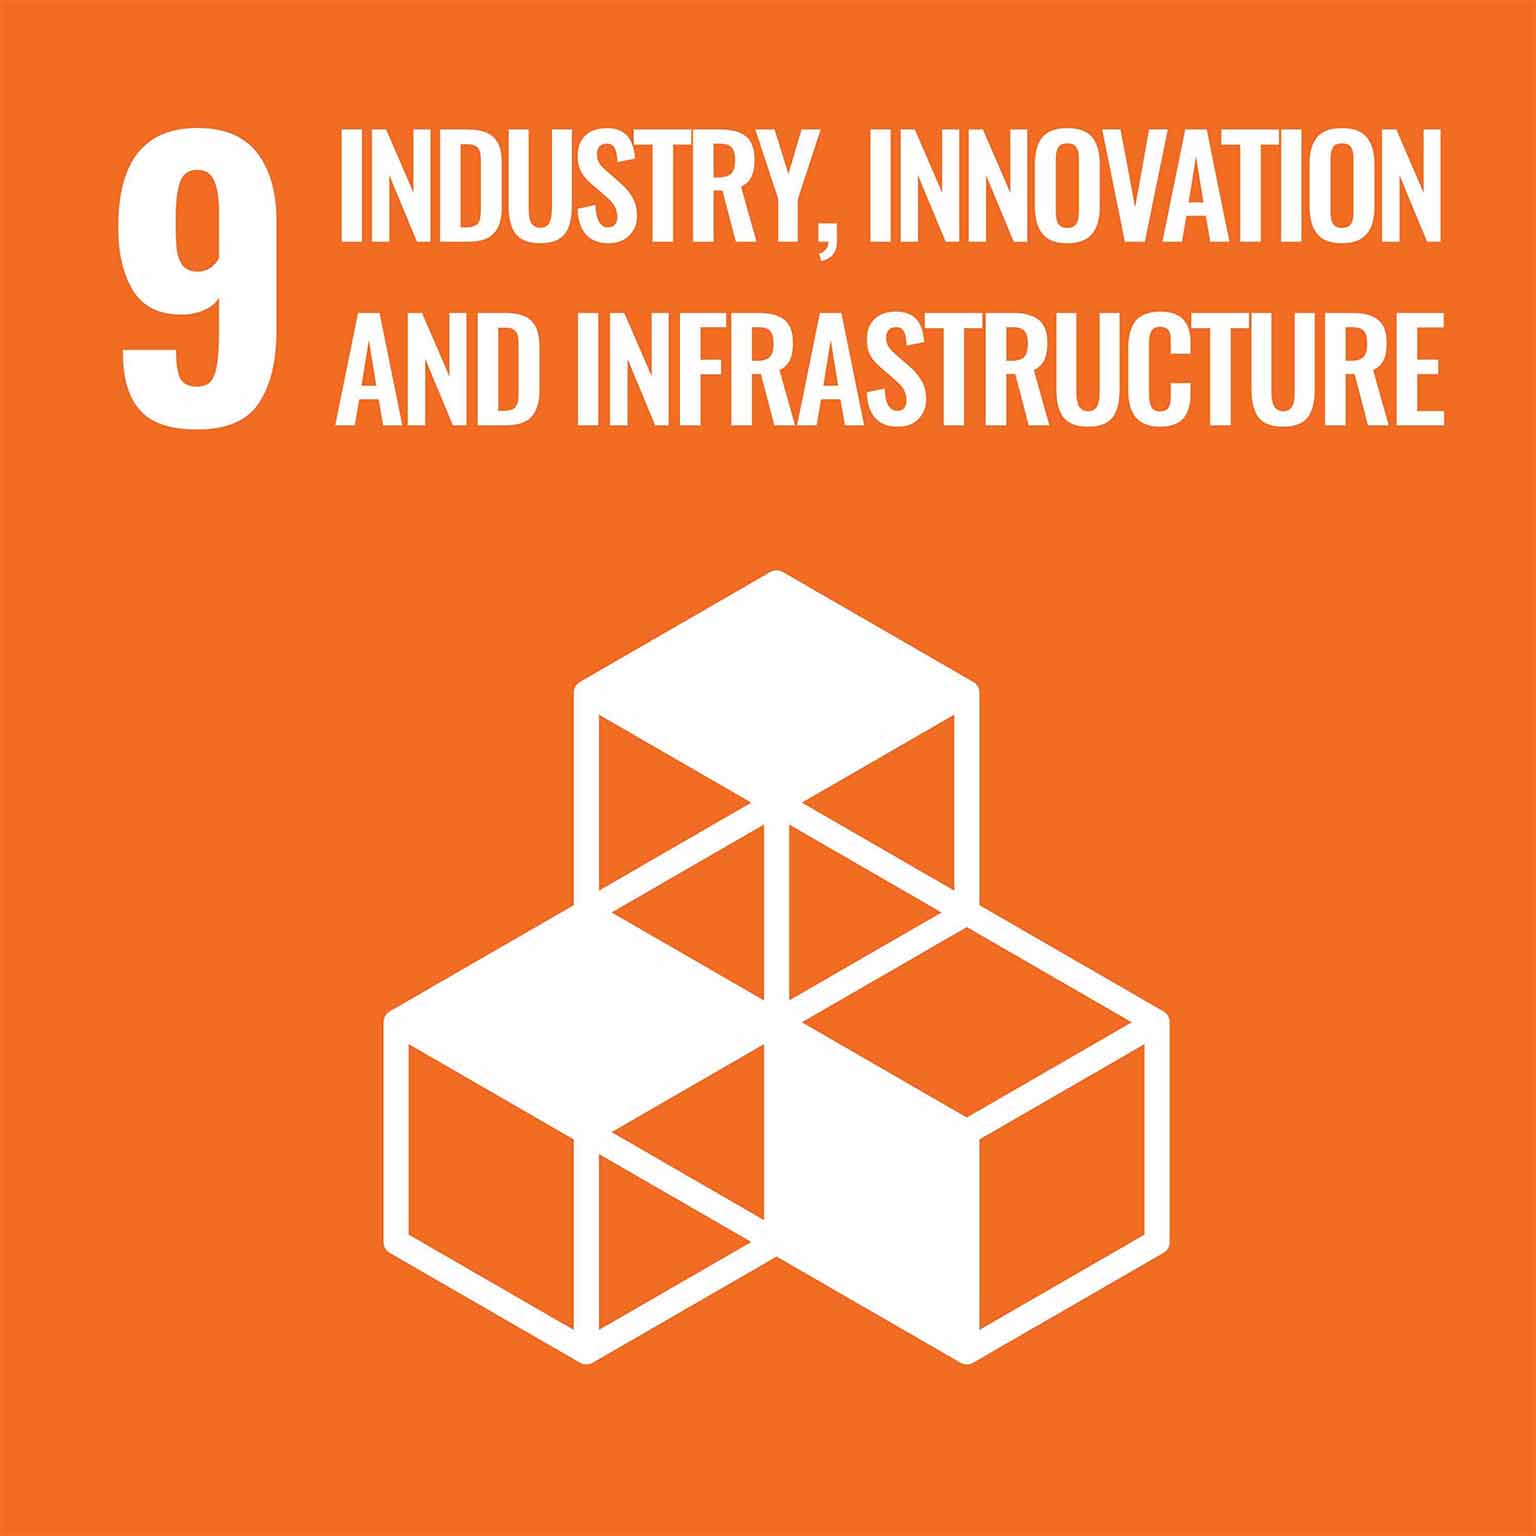 UN Goal: Industry, Innovation and Infrastructure